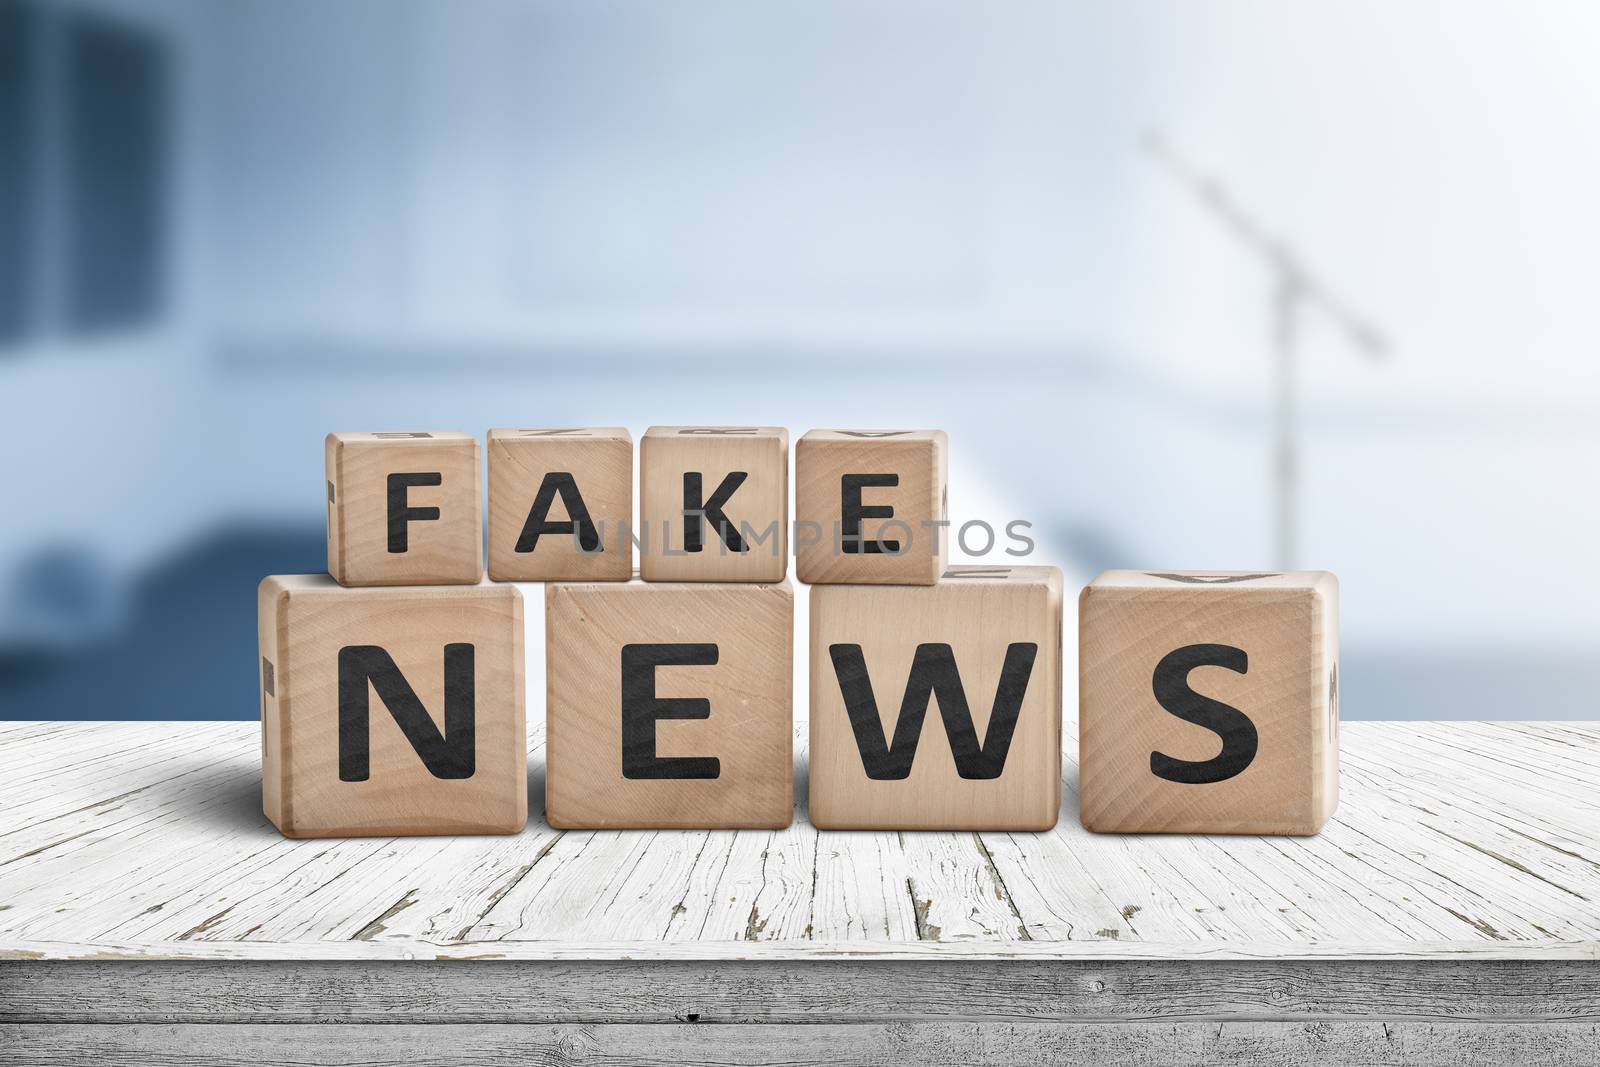 Fake news sign on a wooden desk in a blue room with a blurry background